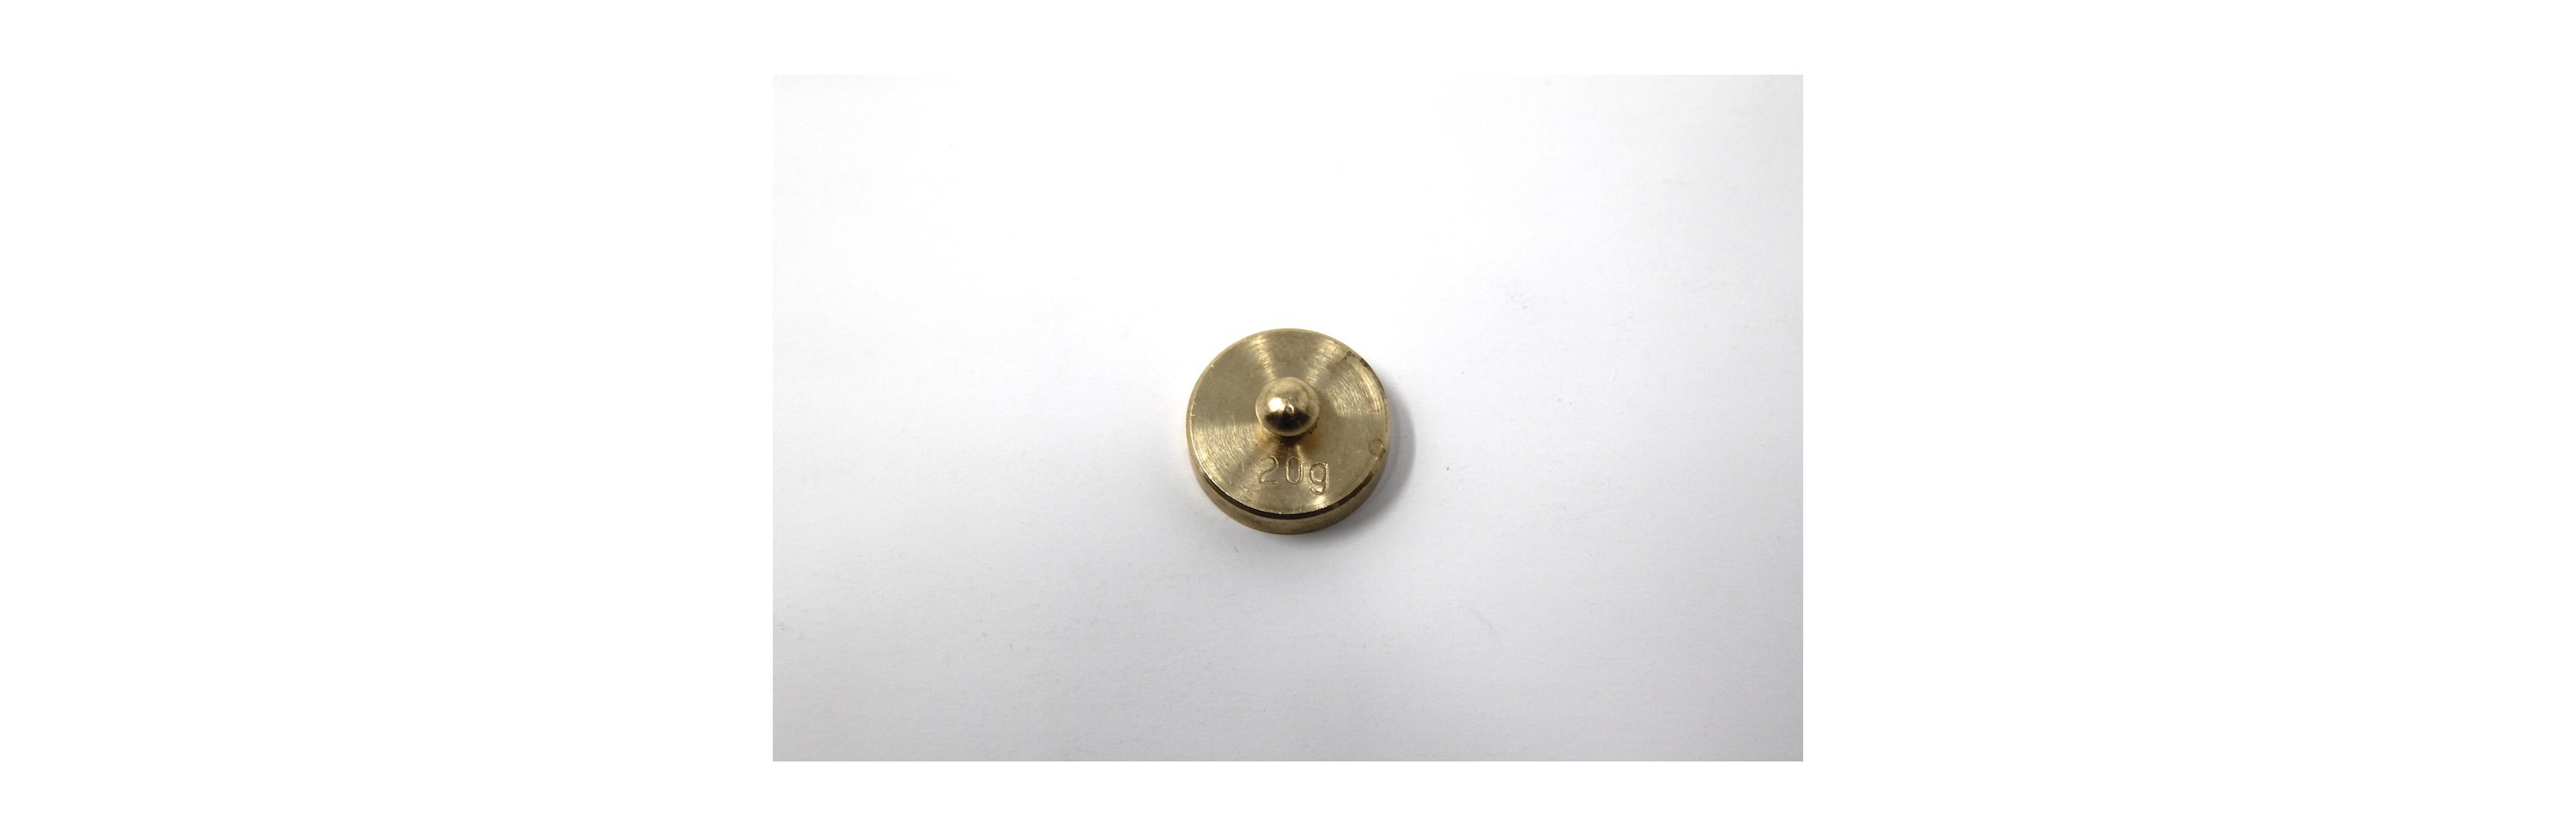 Wissner® active learning - Weight brass 20 g